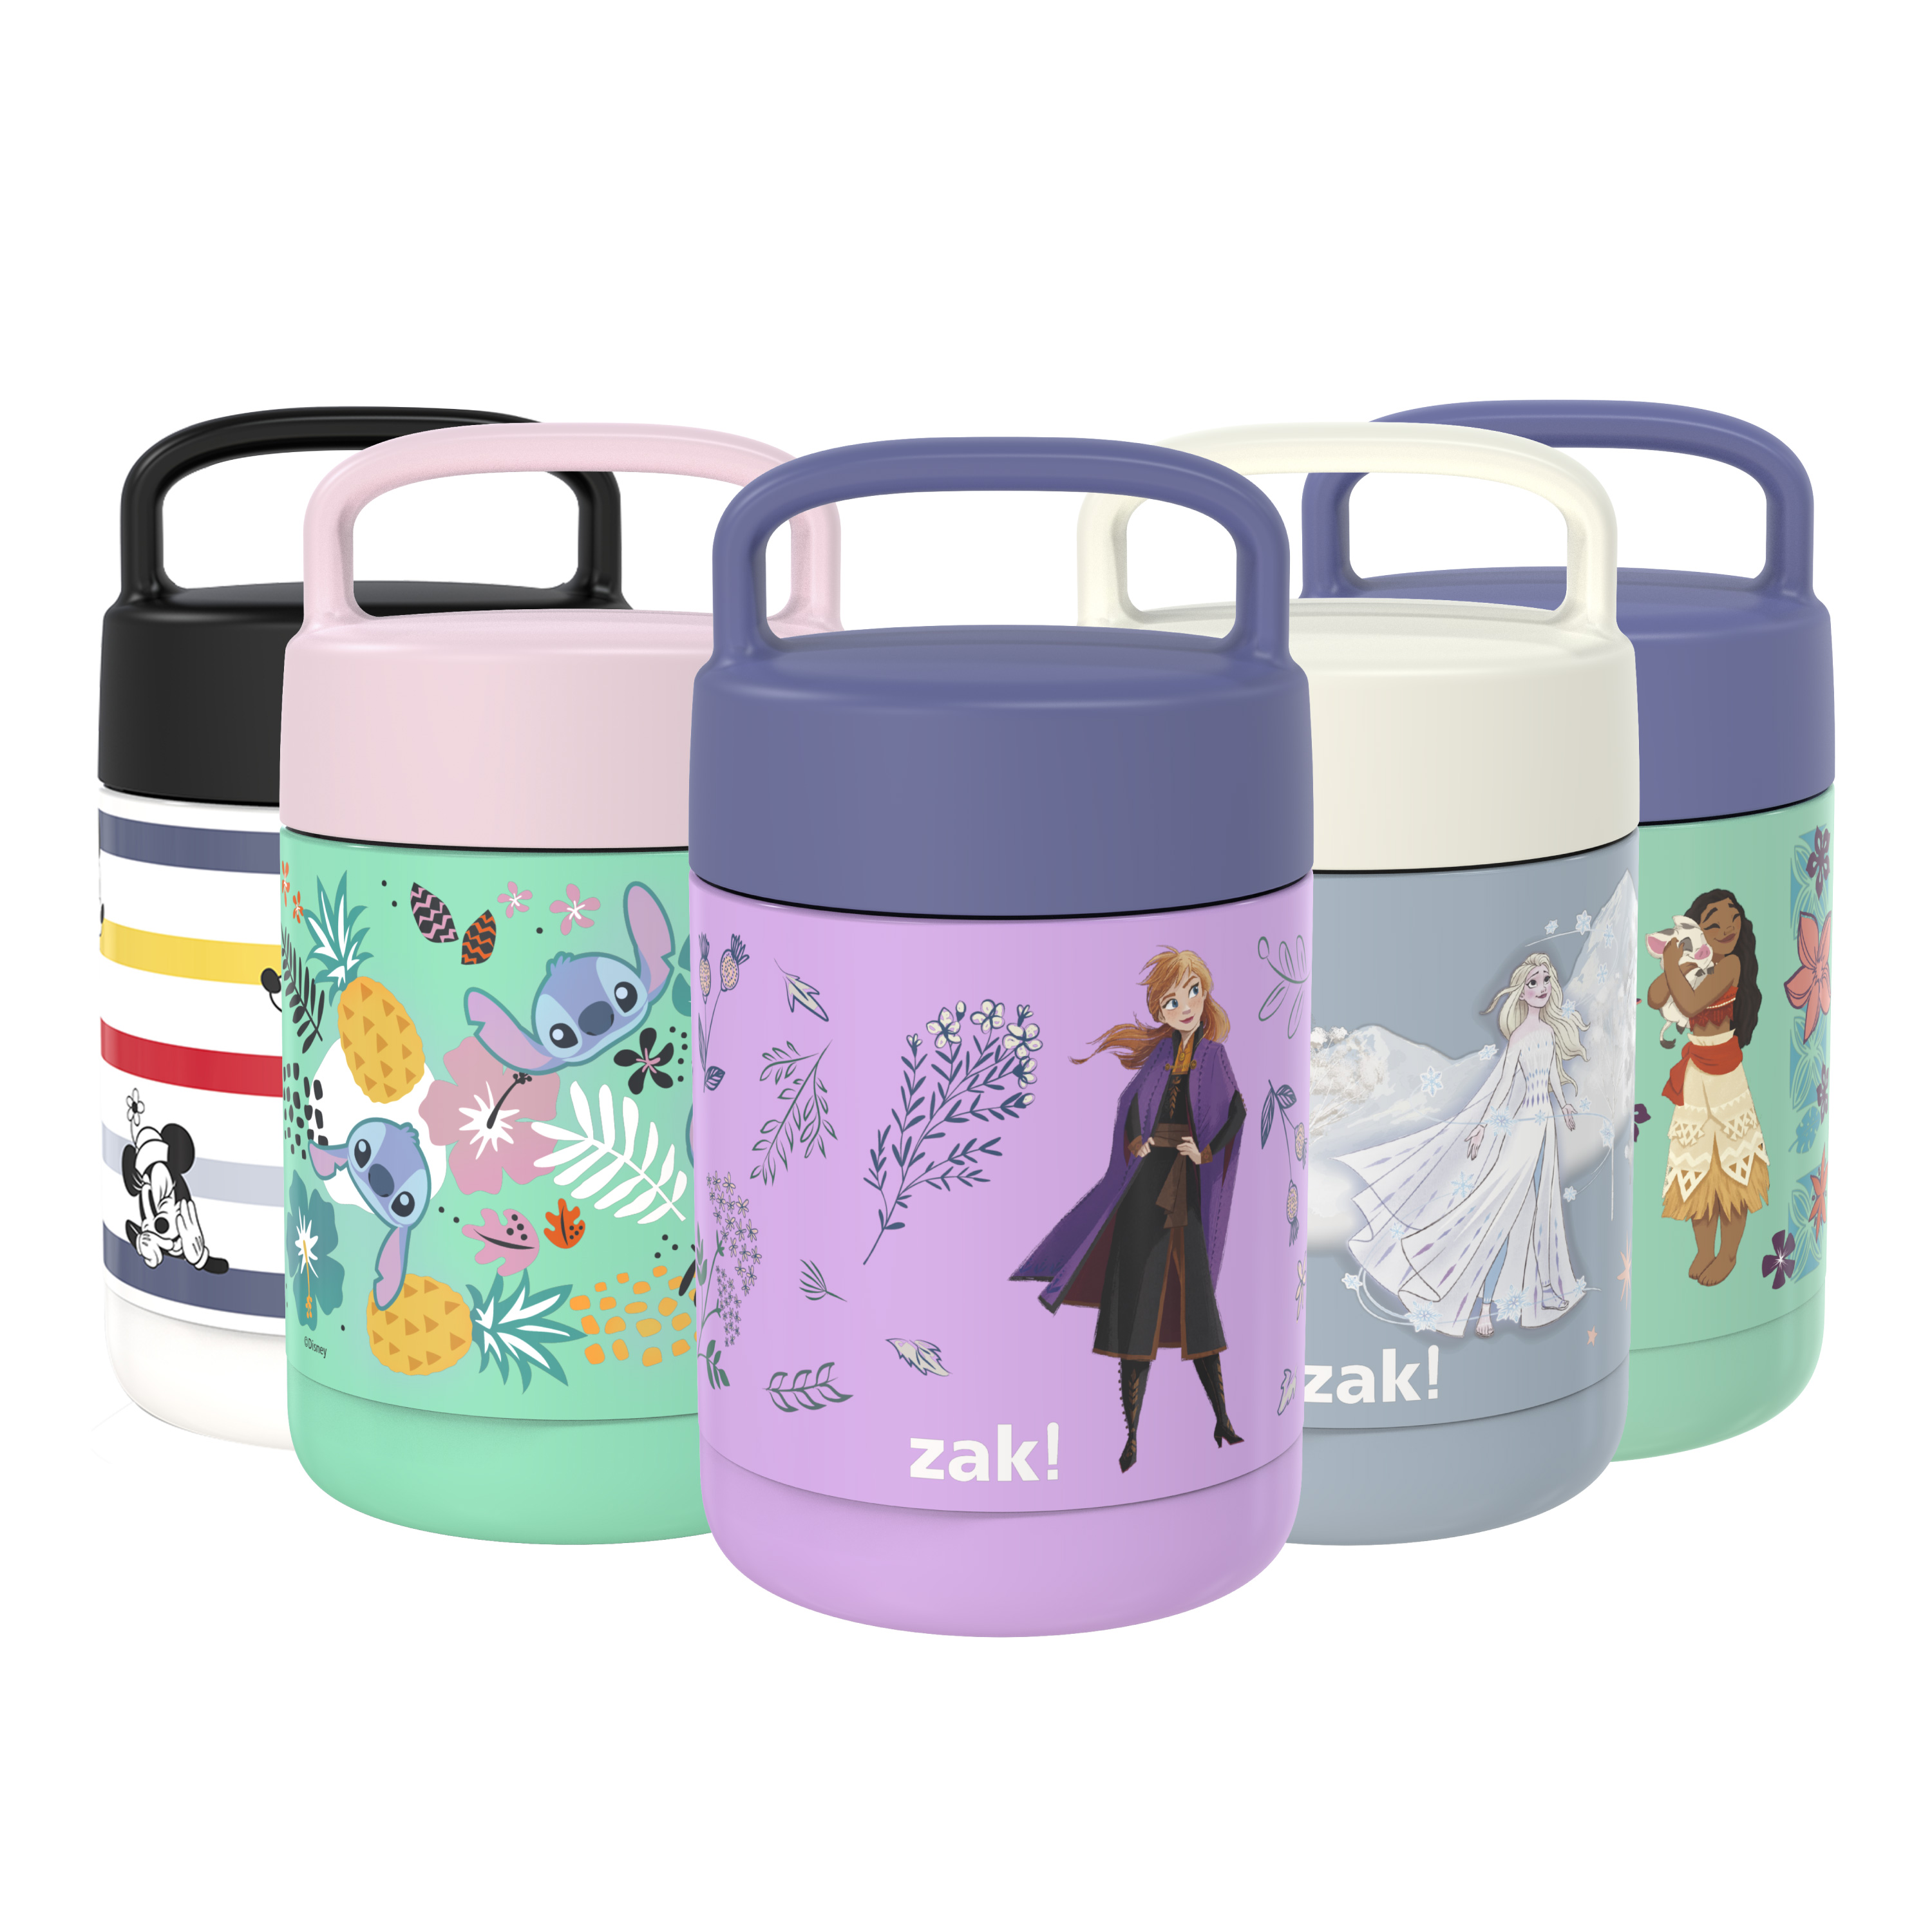 Disney Frozen 2 Movie Reusable Vacuum Insulated Stainless Steel Food Container, Princess Anna slideshow image 1